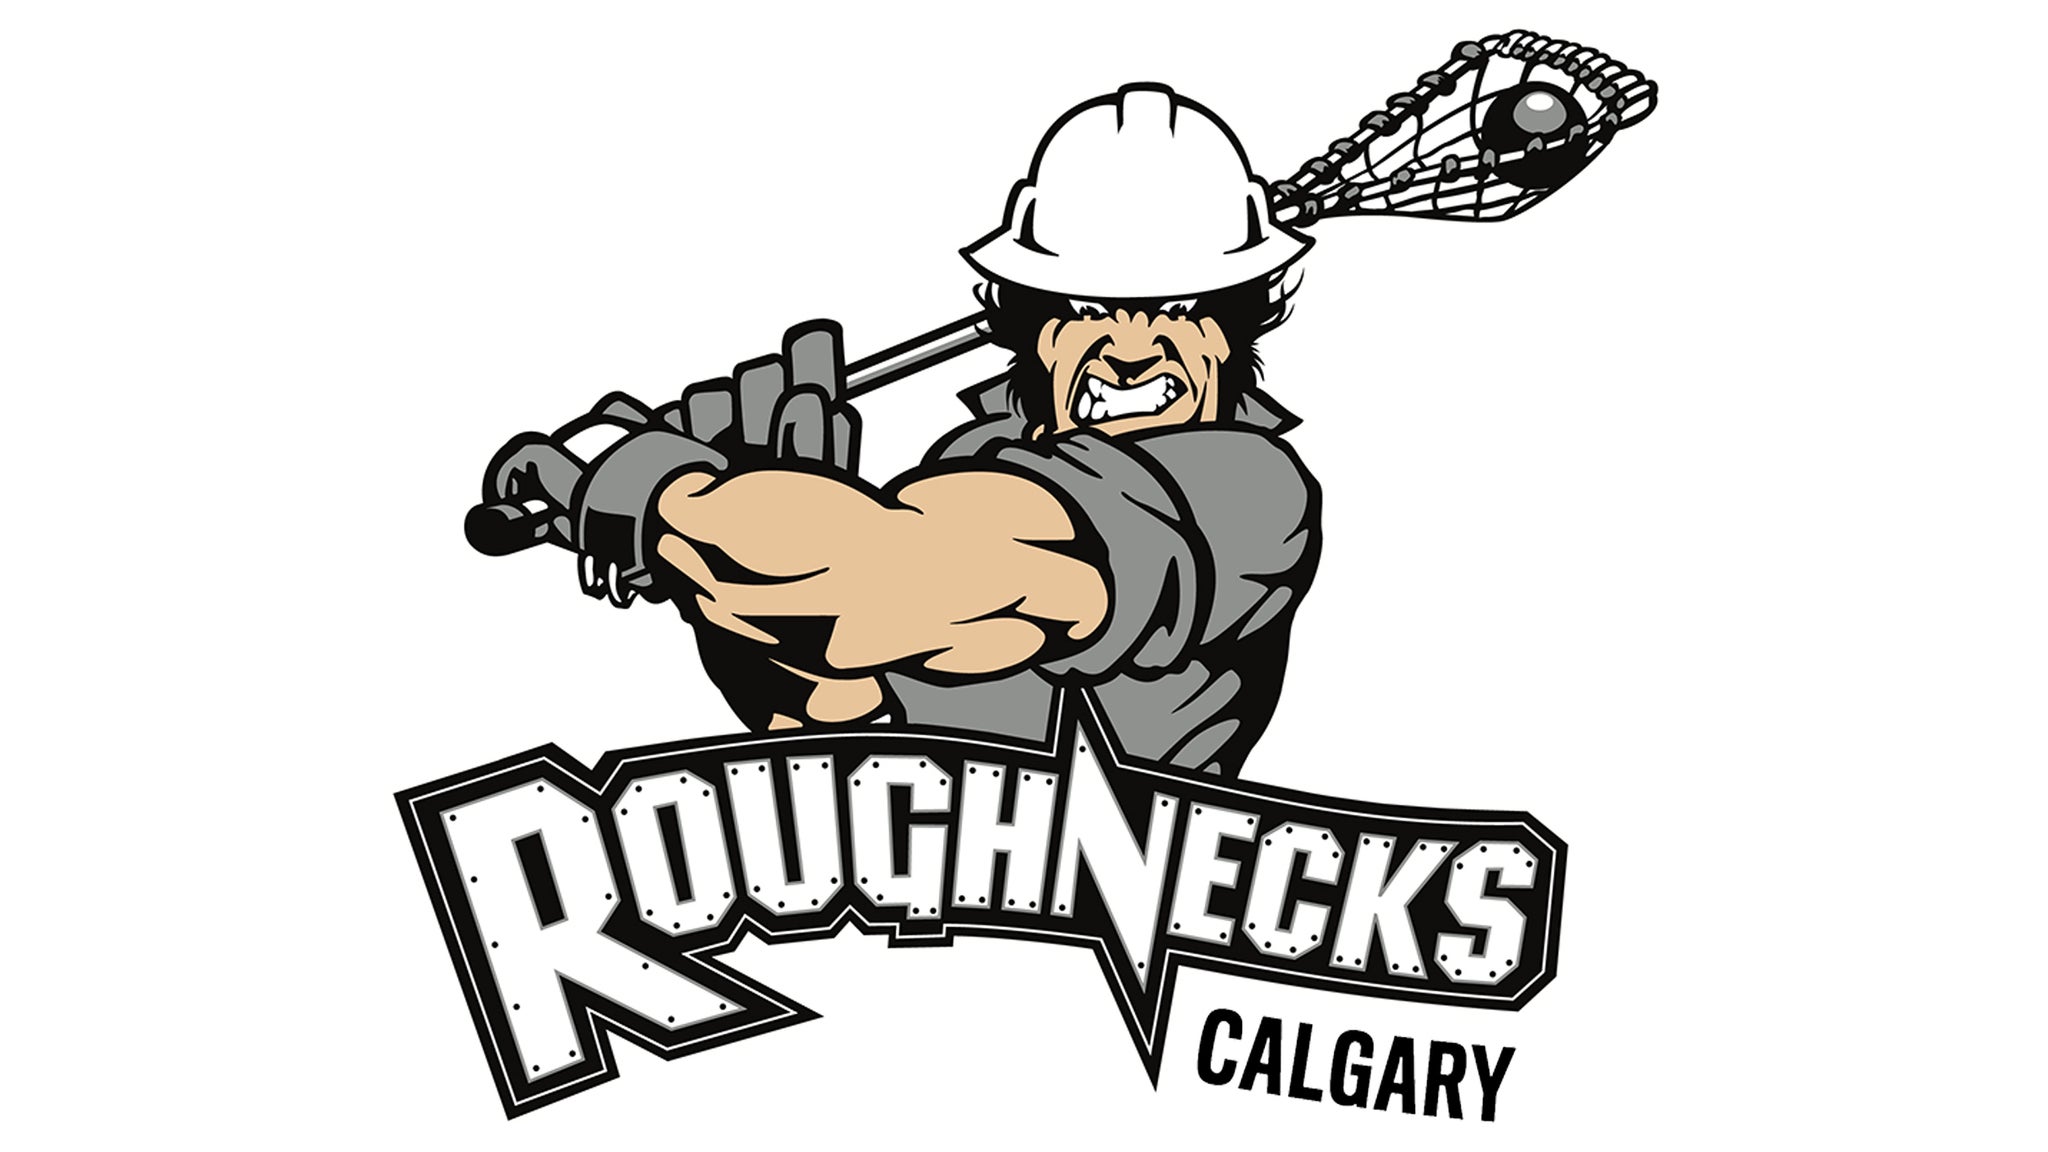 Calgary Roughnecks vs. Panther City Lacrosse Club in Calgary promo photo for 12 Days of Christmas presale offer code